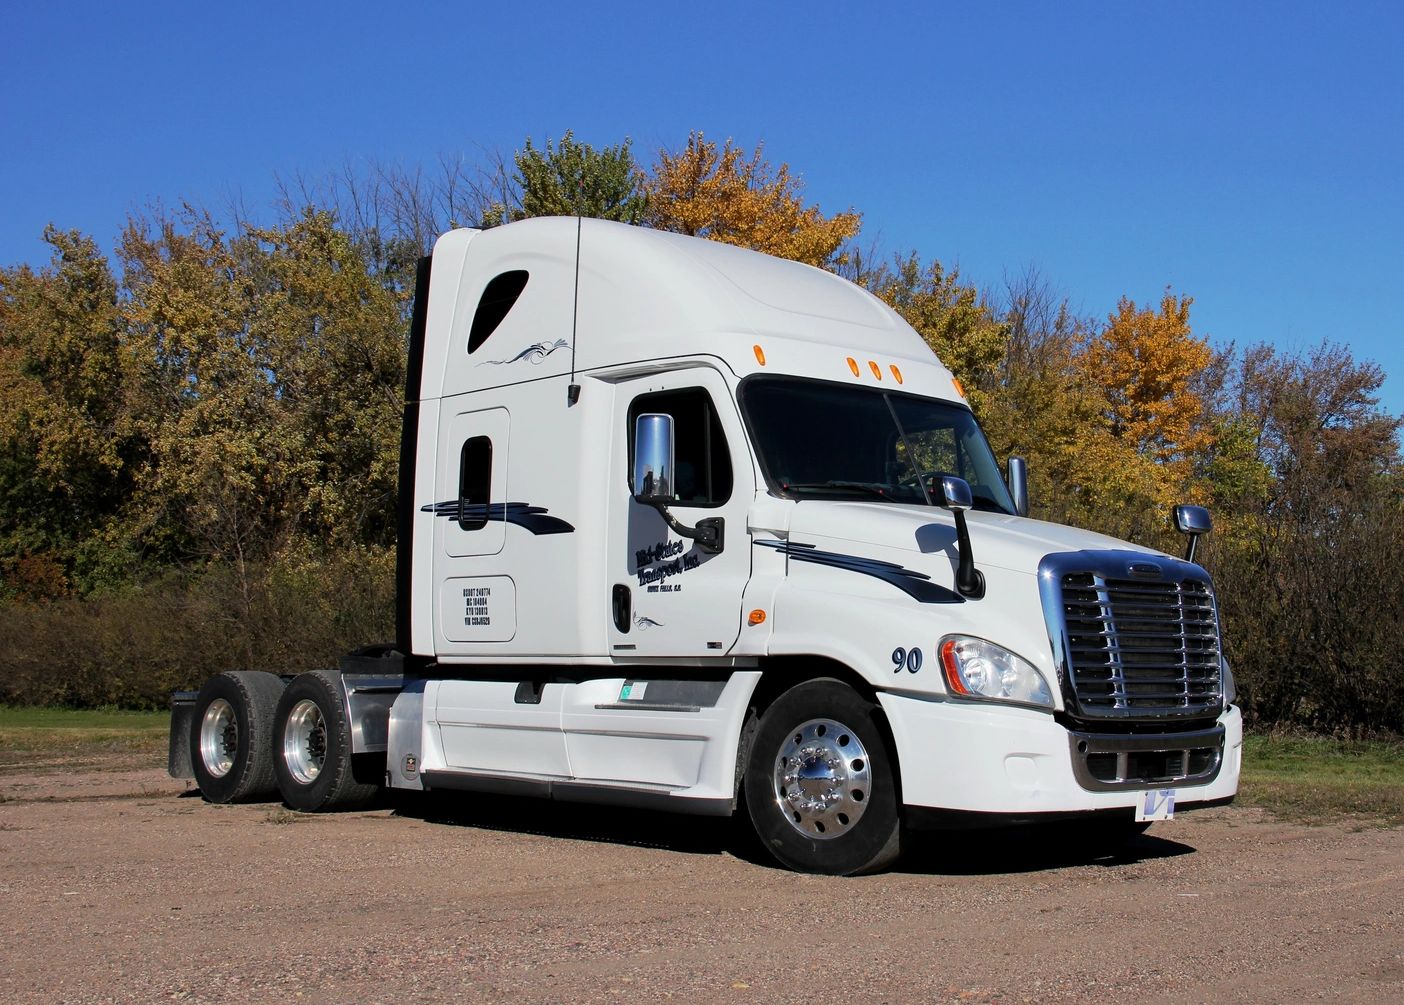 Sioux Falls Trucking Company Regional and Long Haul Trucking Services White Truck Cab